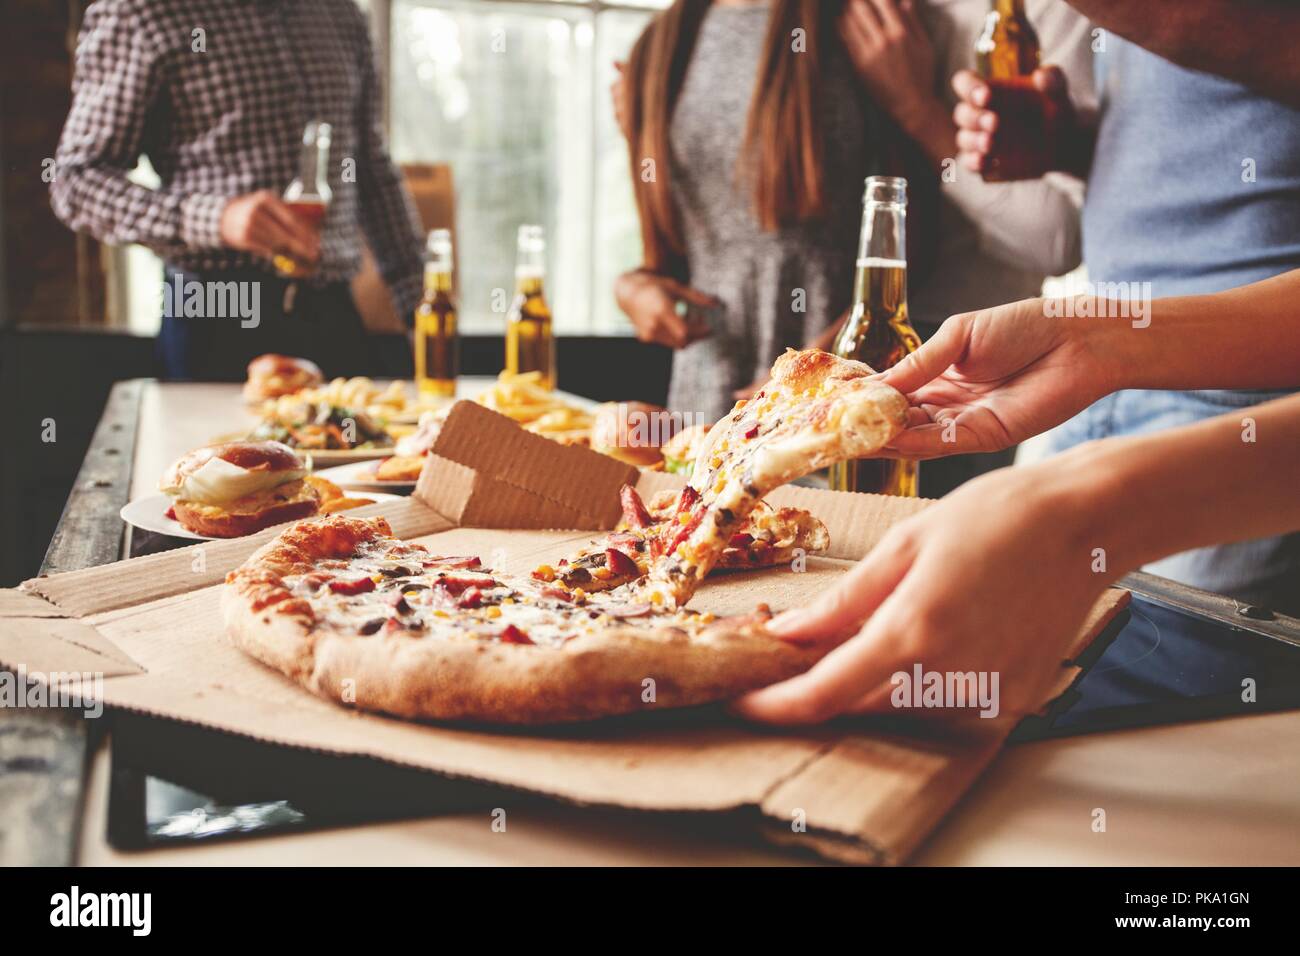 Friends taking slices of tasty pizza from plate, close up view. Stock Photo